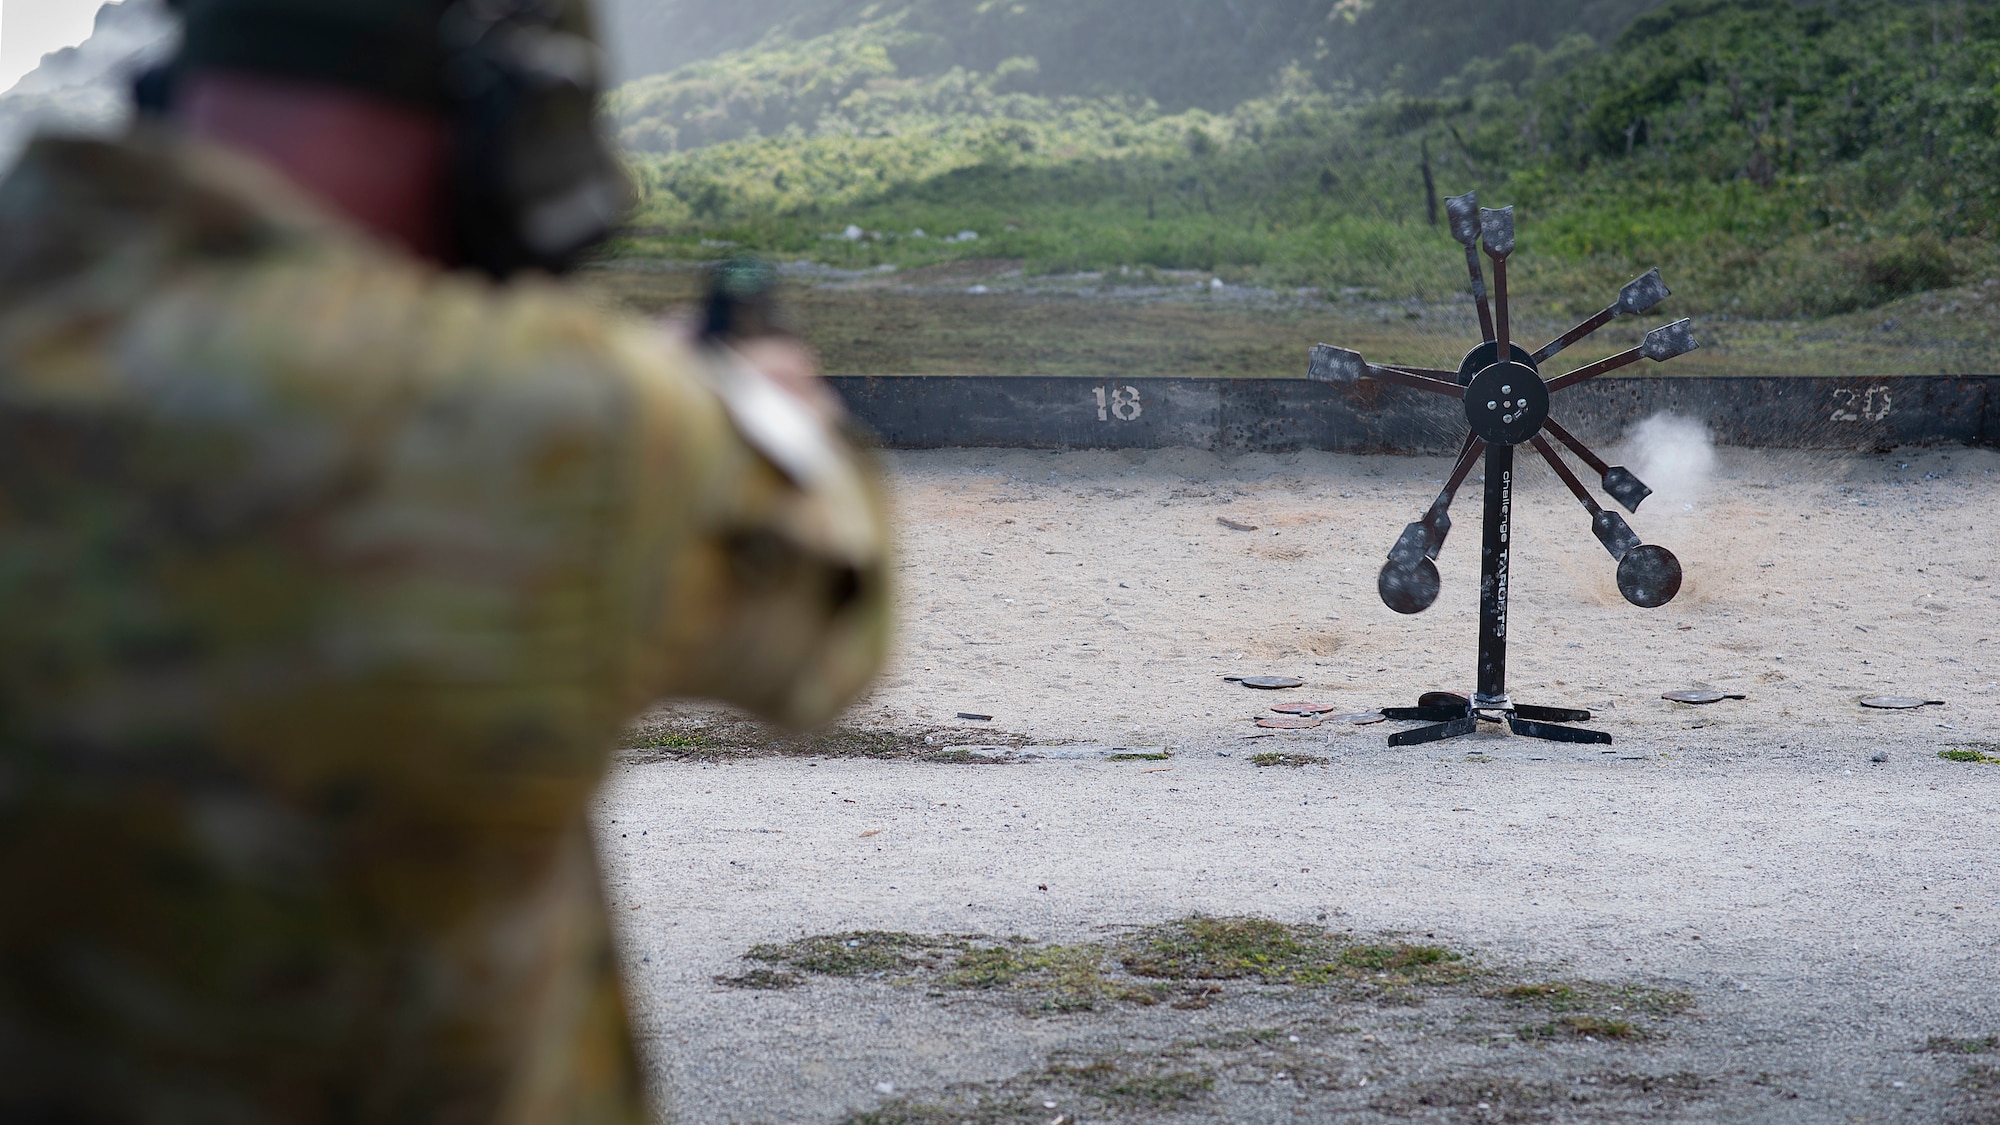 A Royal Australian Air Force officer takes in firing practice on the range during Pacific Defender 21-1 on Andersen Air Force Base, Guam, January 29, 2021